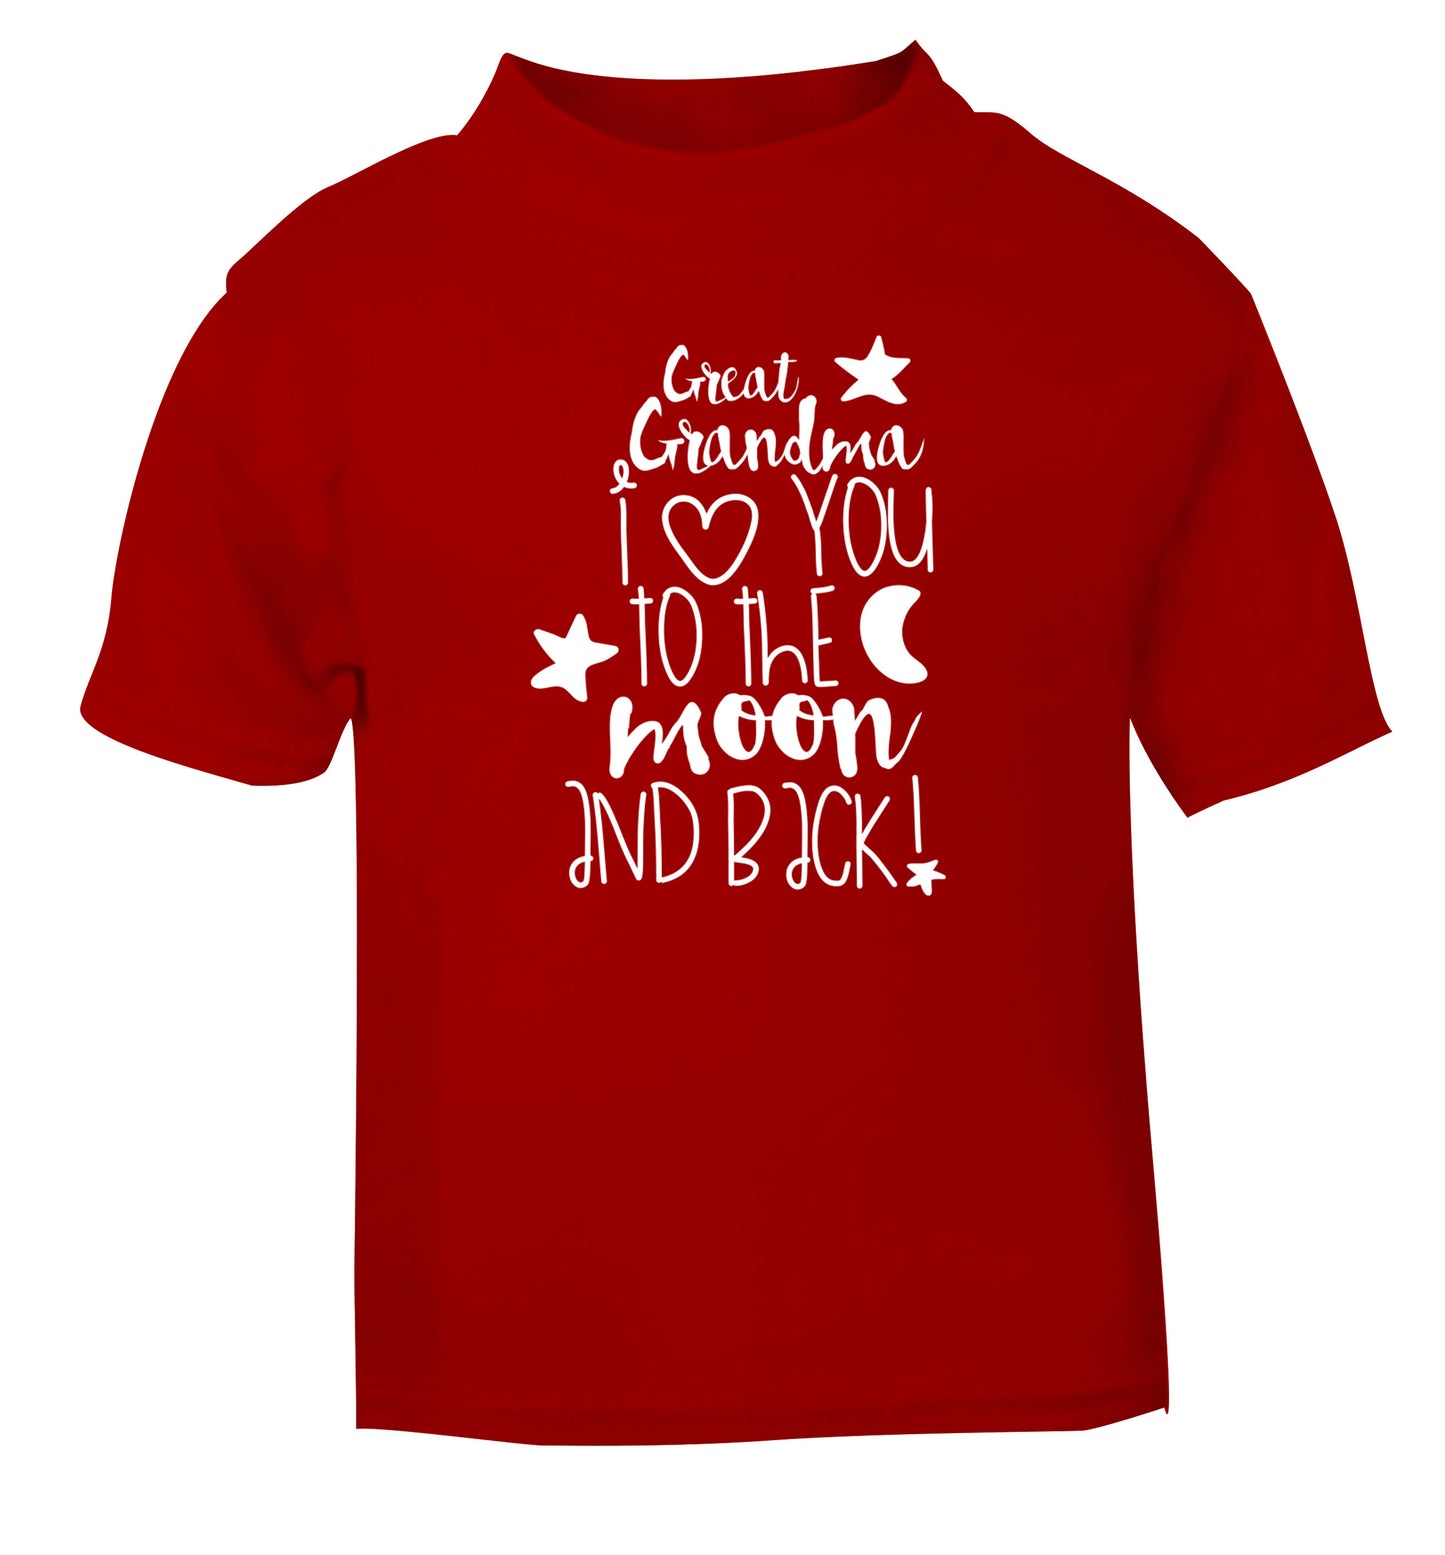 Great Grandma I love you to the moon and back red Baby Toddler Tshirt 2 Years